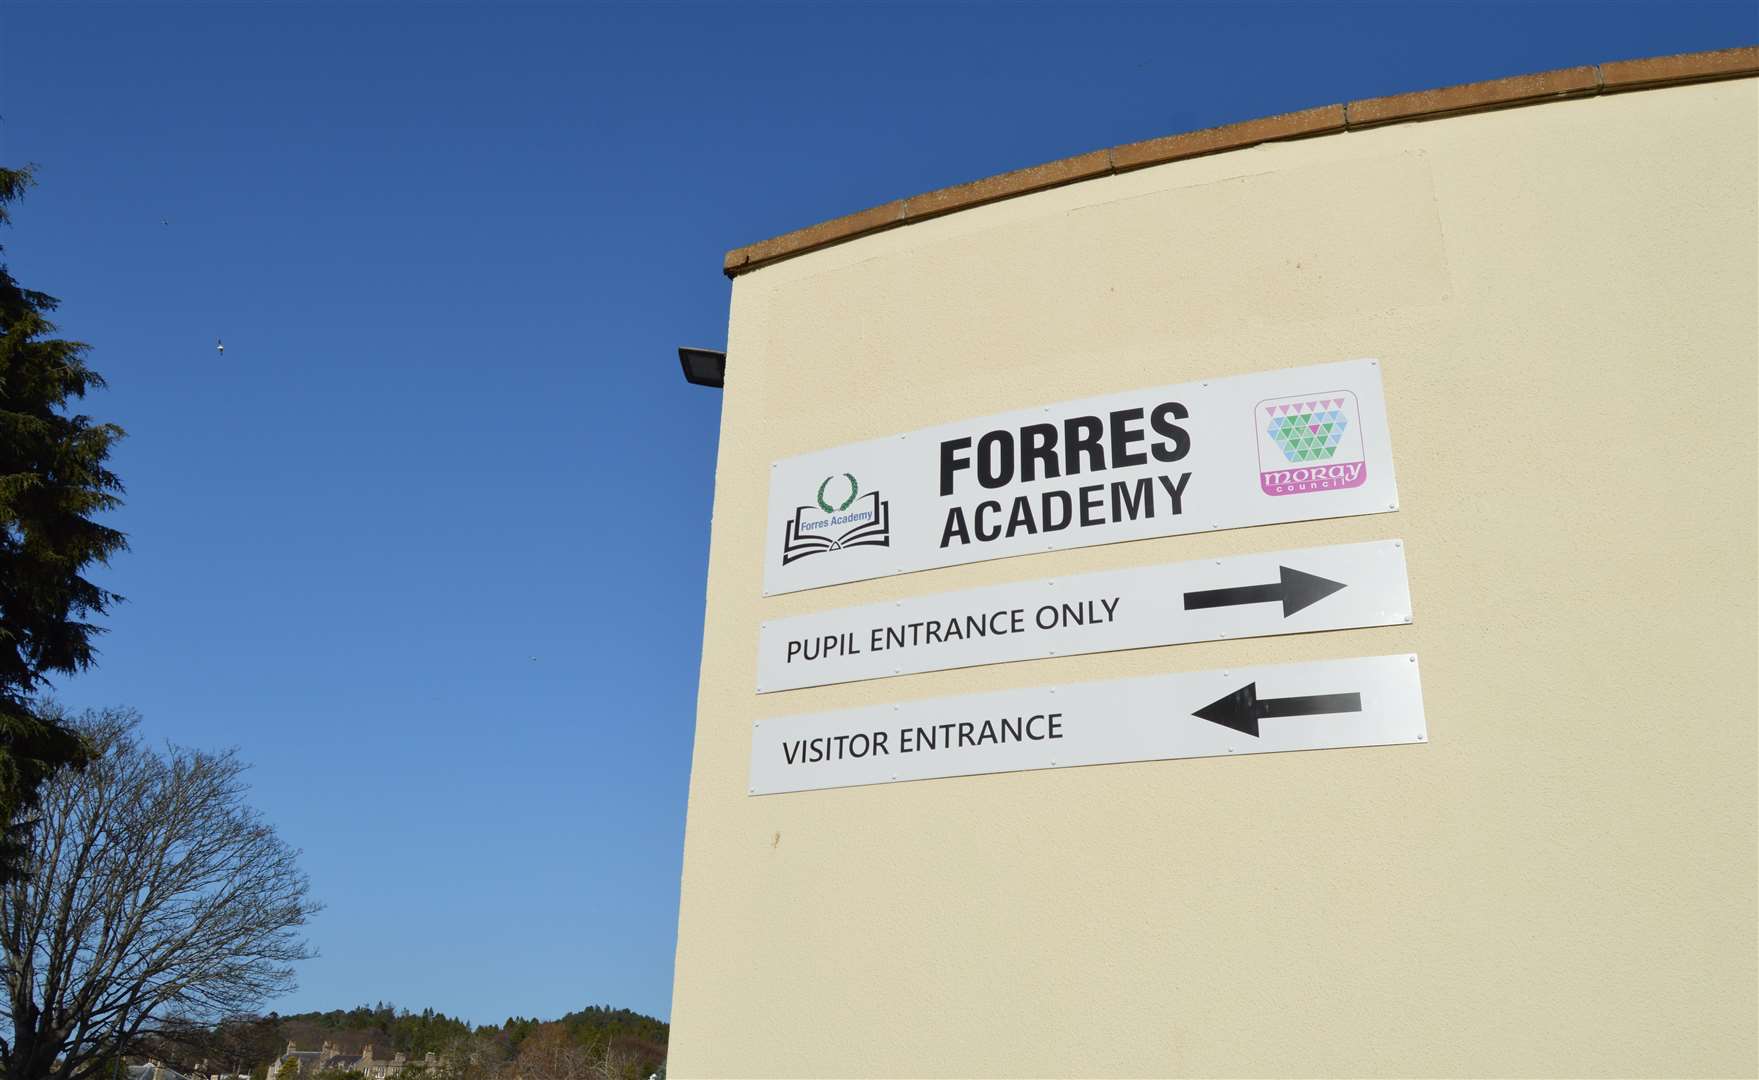 Staff at Forres Academy have been praised by school inspectors.